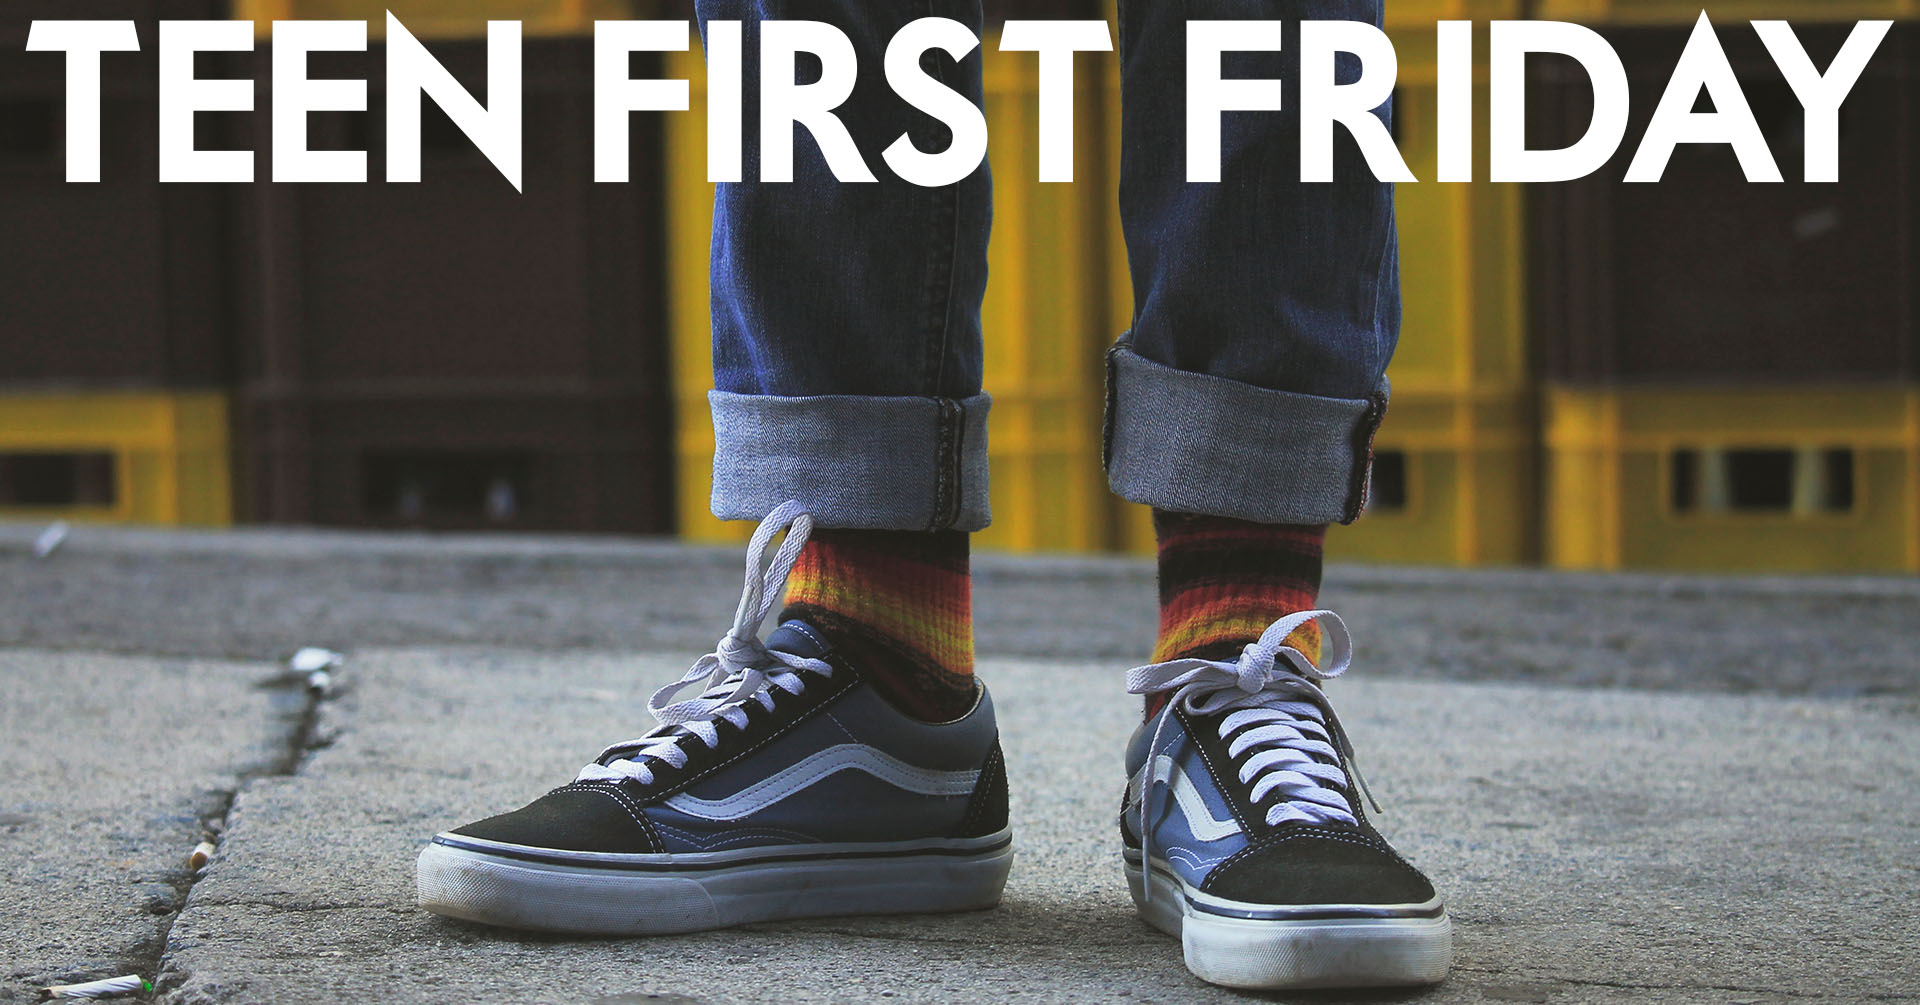 Feet of a person wearing sneakers and colorful socks, with text that says Teen First Friday